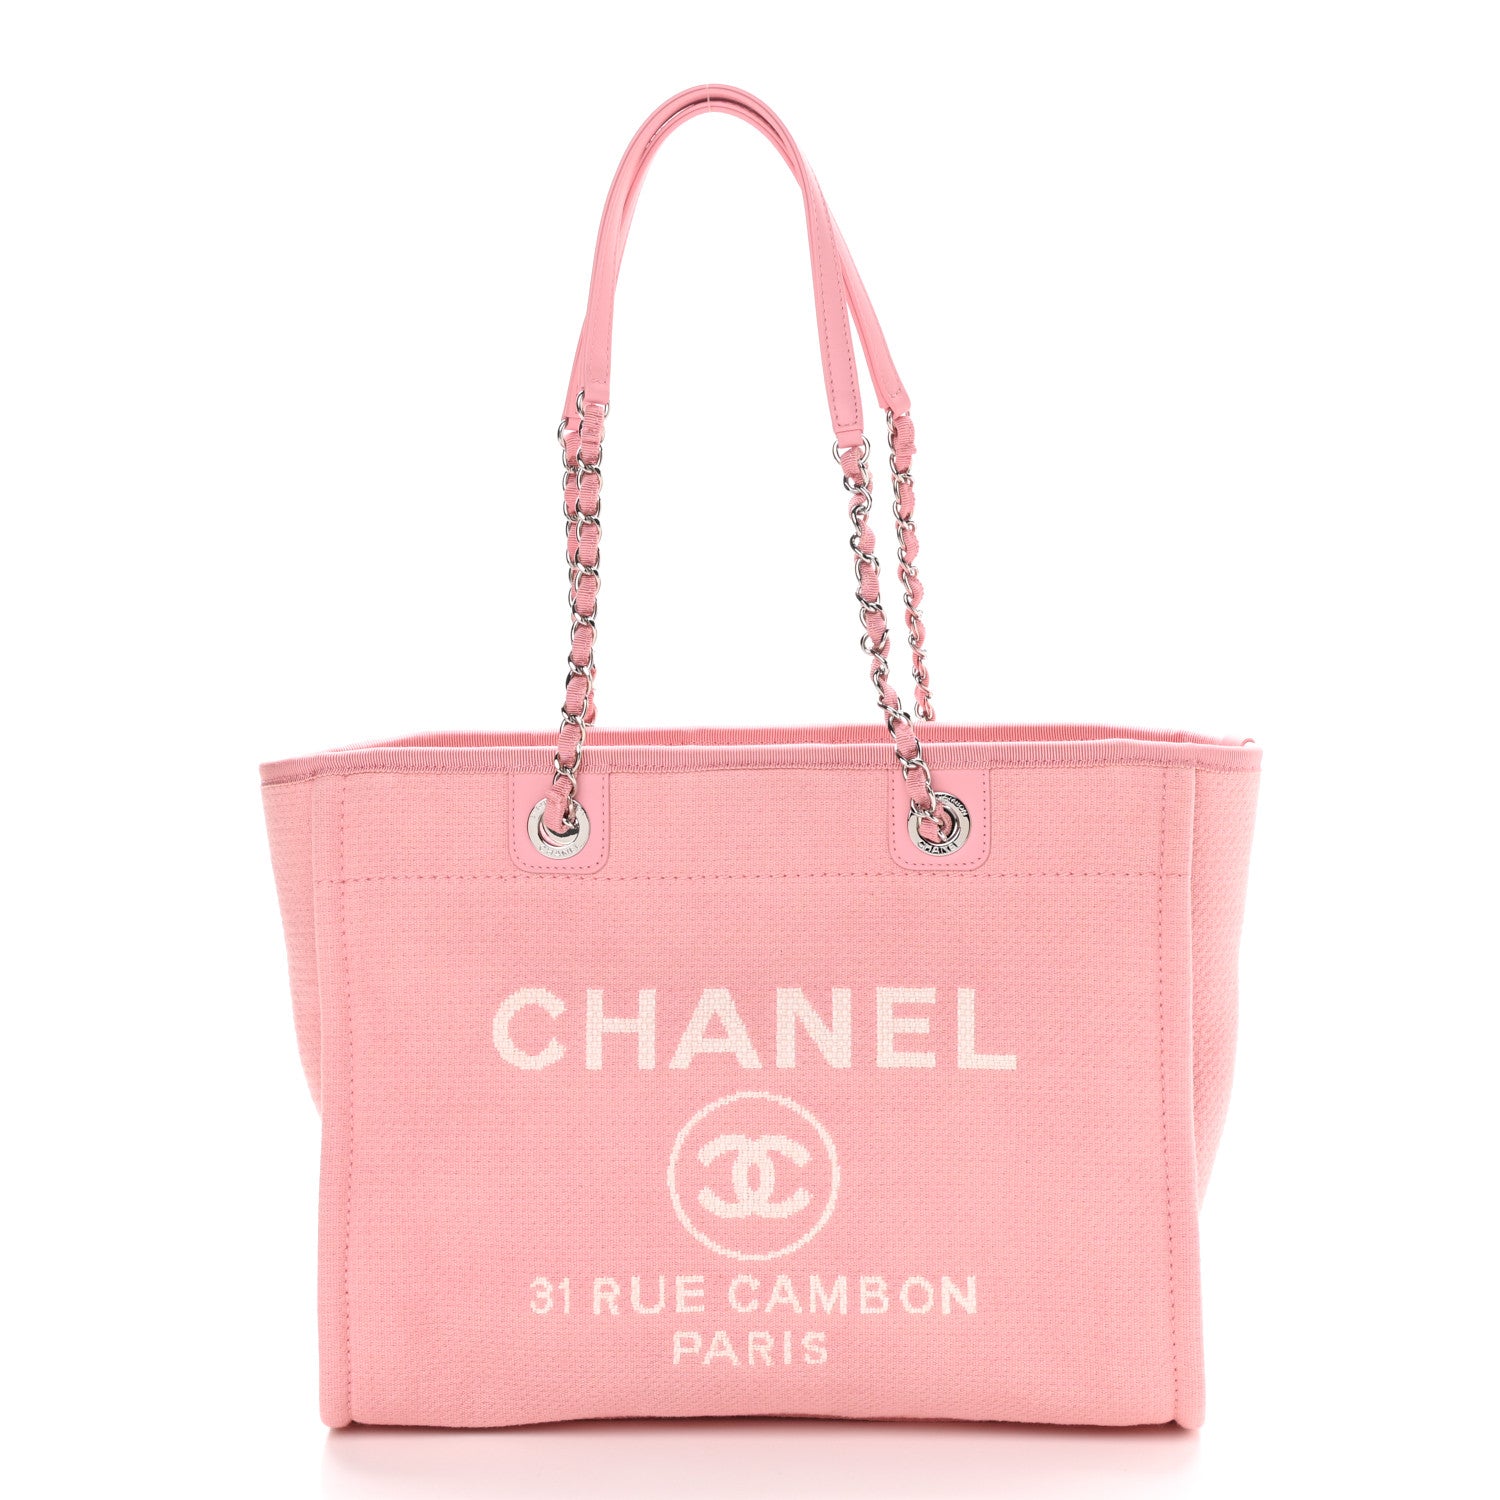 CHANEL DEAUVILLE MIXED FABRIC TOTE